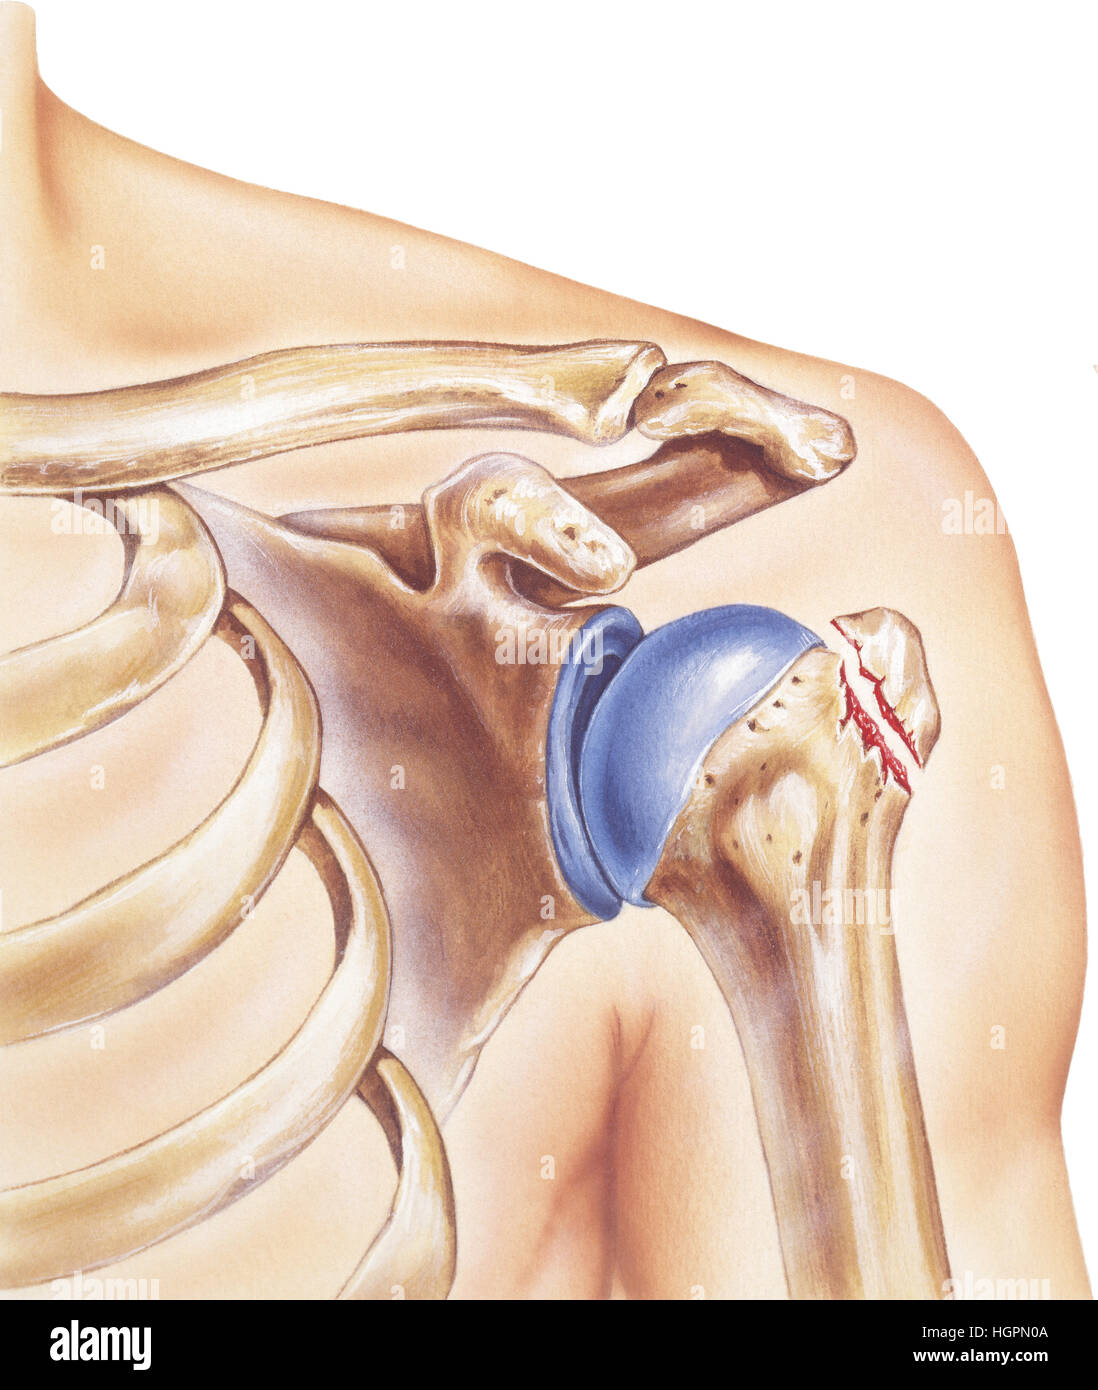 Shoulder - Broken Greater Tubercle. Anatomy of the bones and joints of a shoulder with a broken greater tubercle. Stock Photo